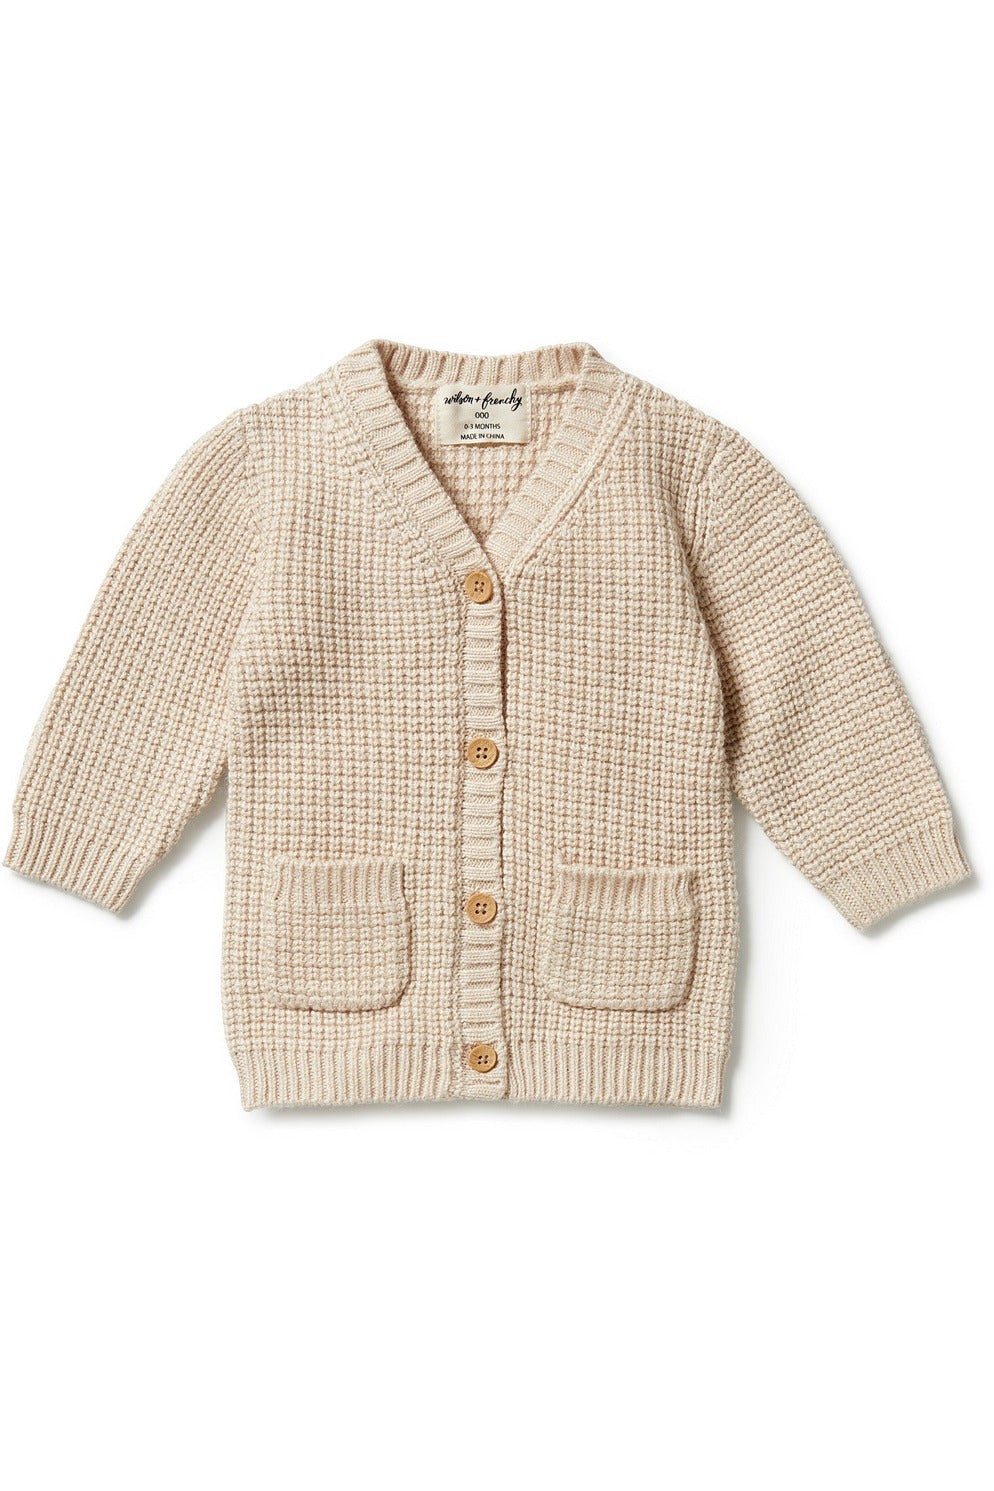 Knitted Button Cardigan - Oatmeal